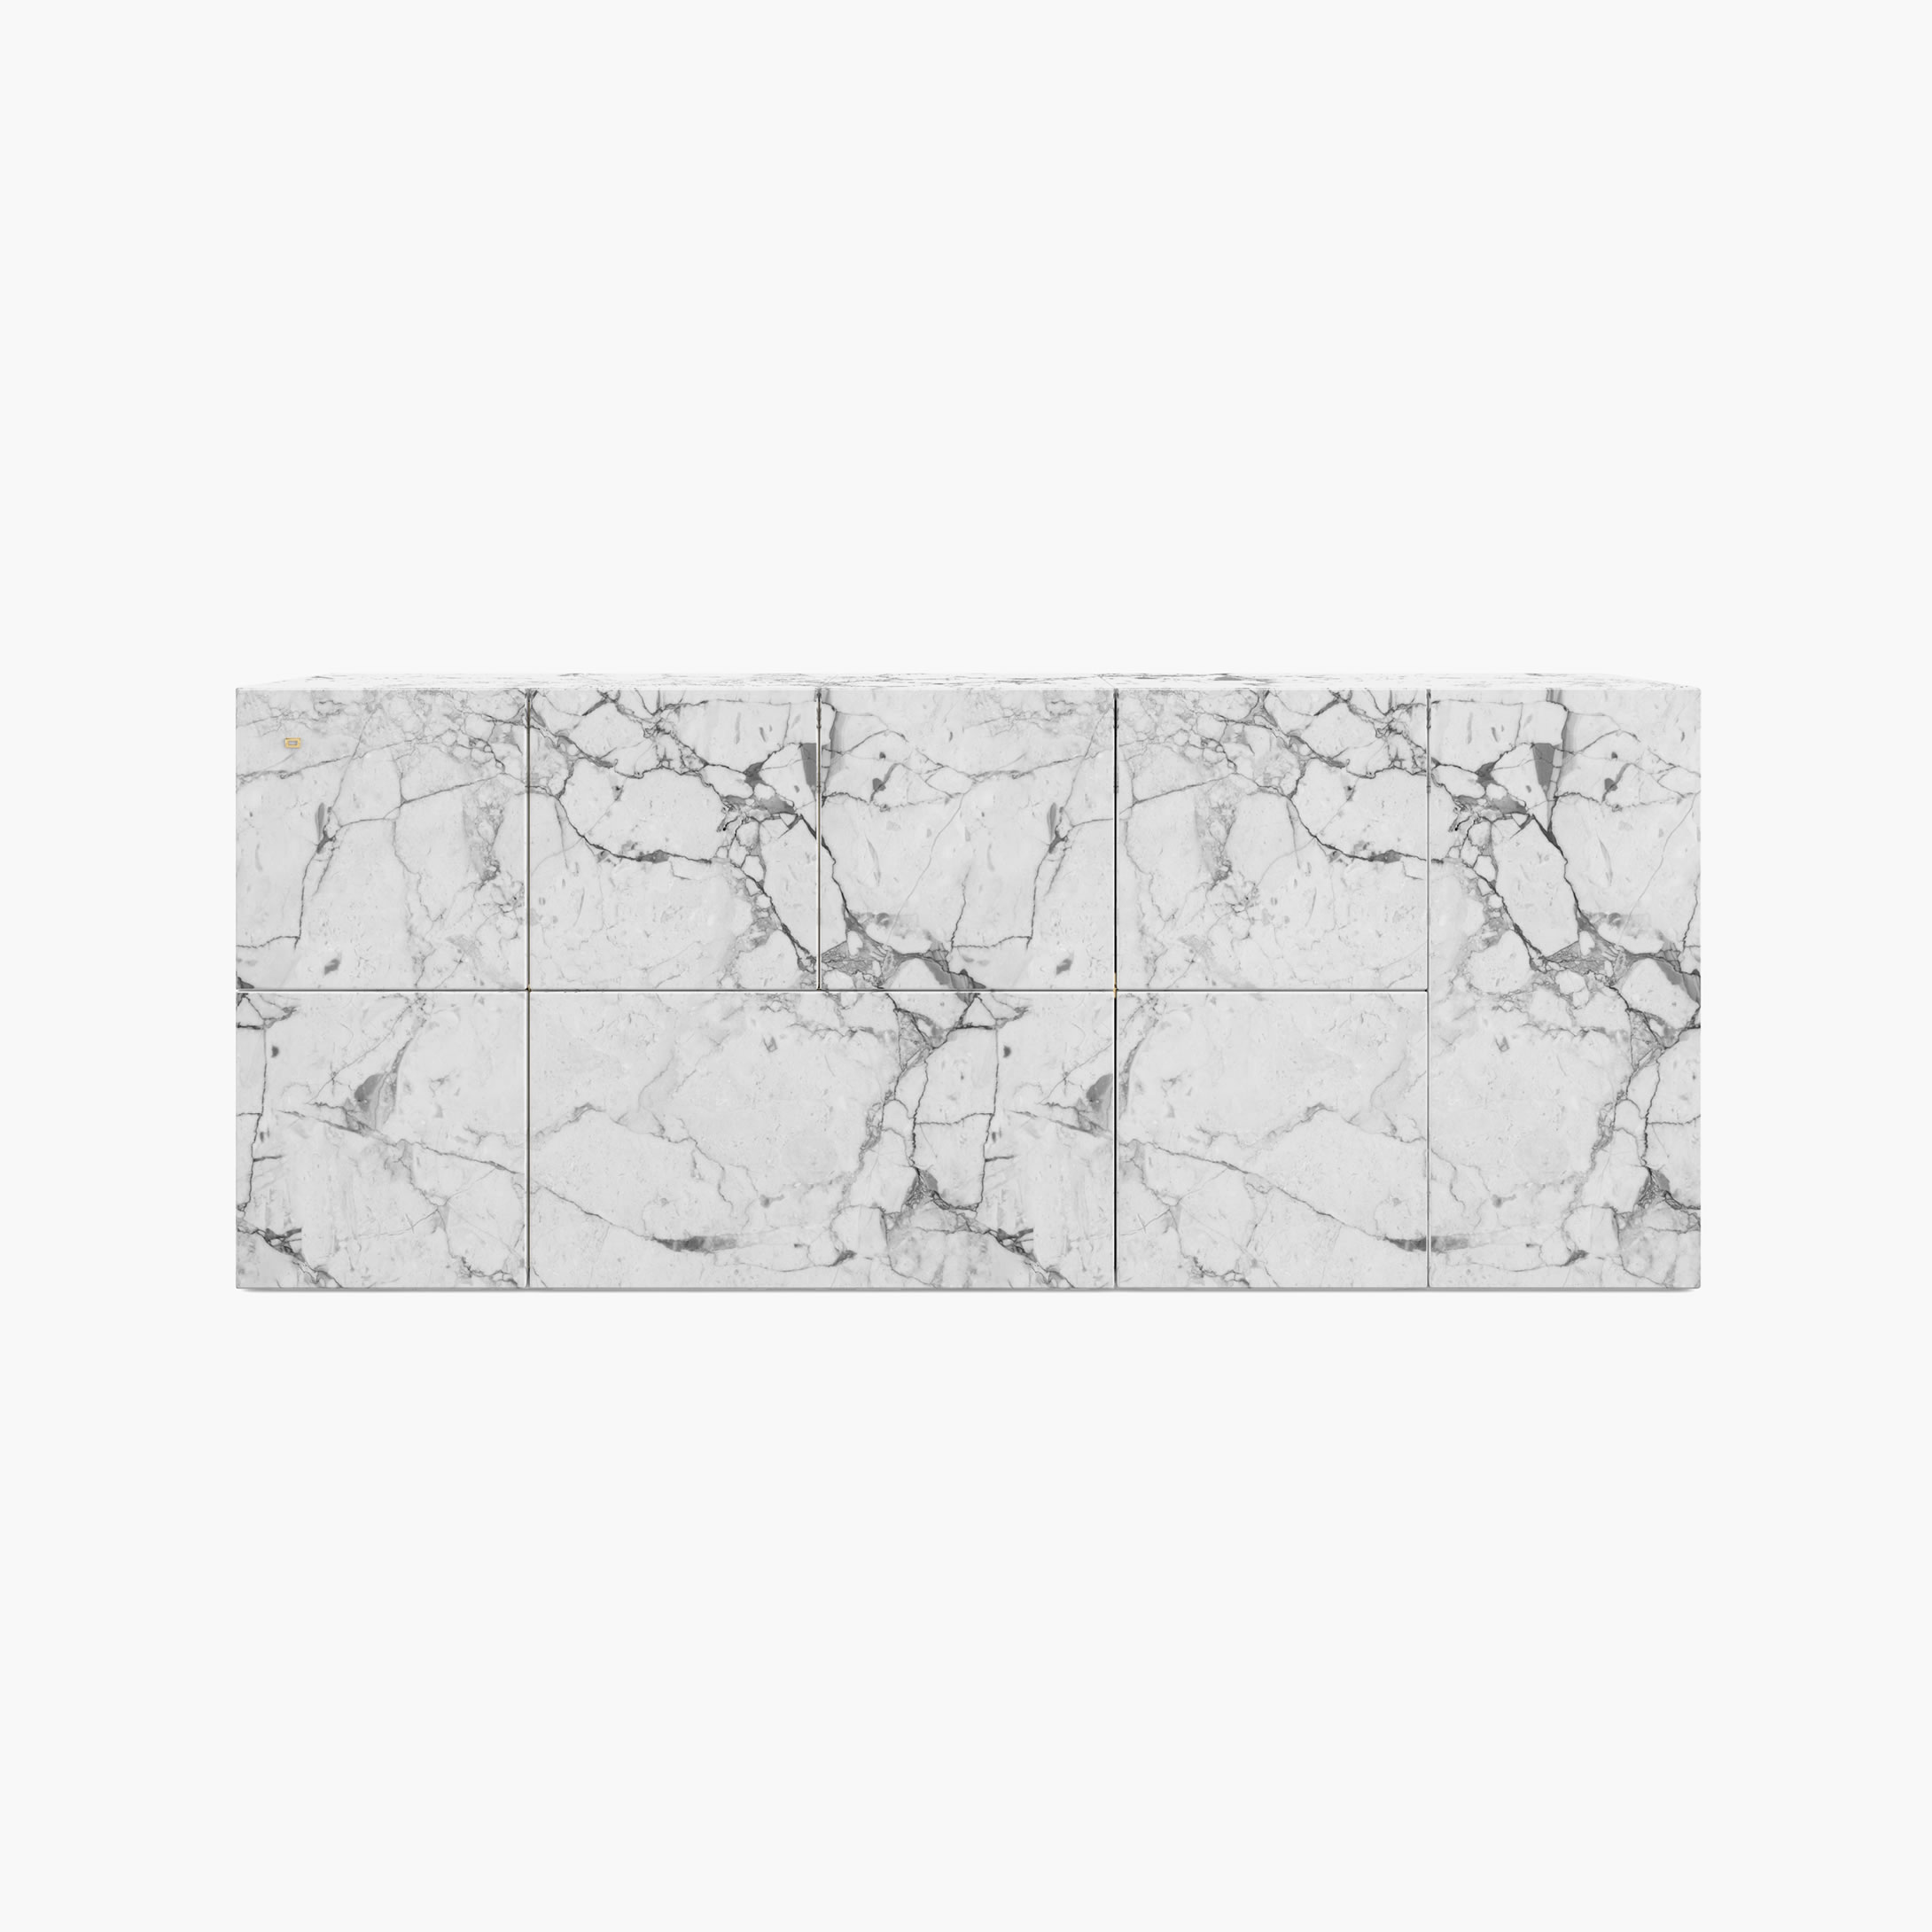 Sideboard of cubes White Arabescato Marble collectible Living Room designs Consoles  Sideboards FS 21 A FELIX SCHWAKE